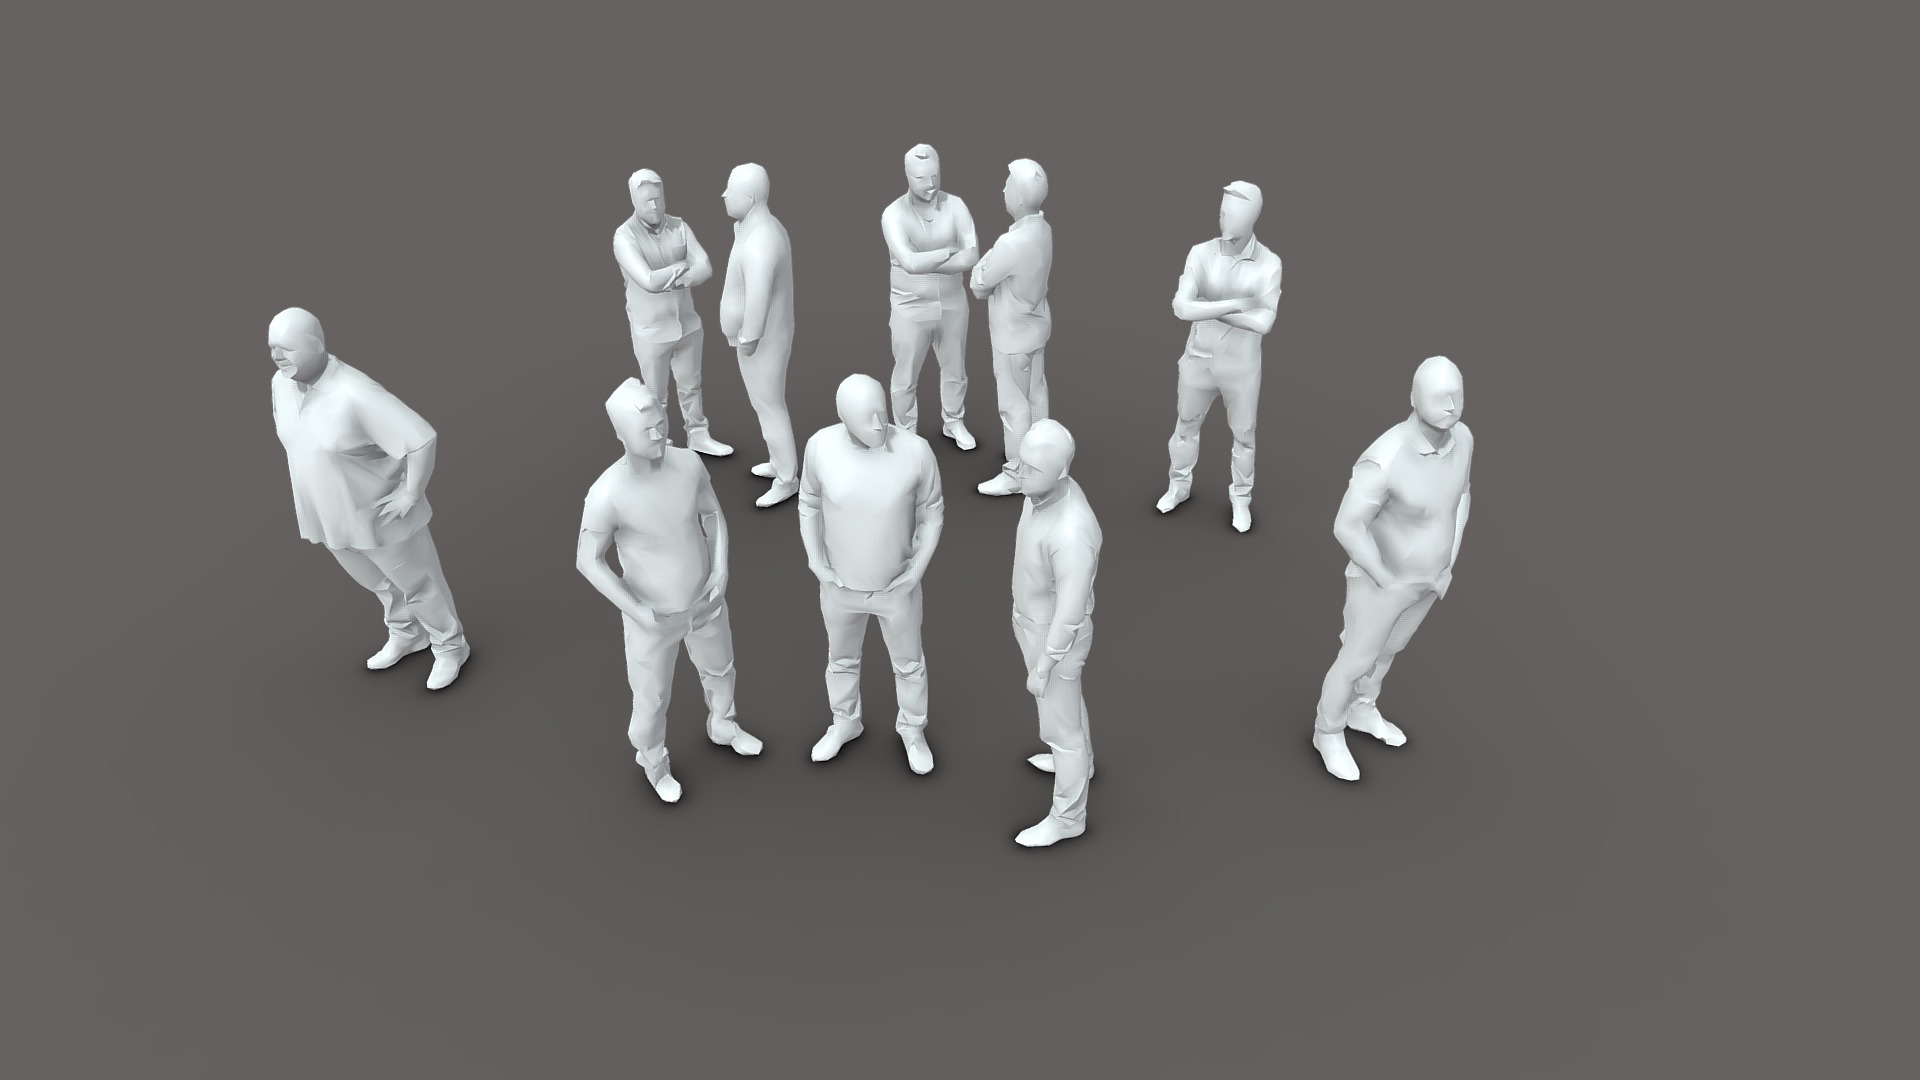 3D model 10 Low Poly People Vol 6 - This is a 3D model of the 10 Low Poly People Vol 6. The 3D model is about a group of men in white.